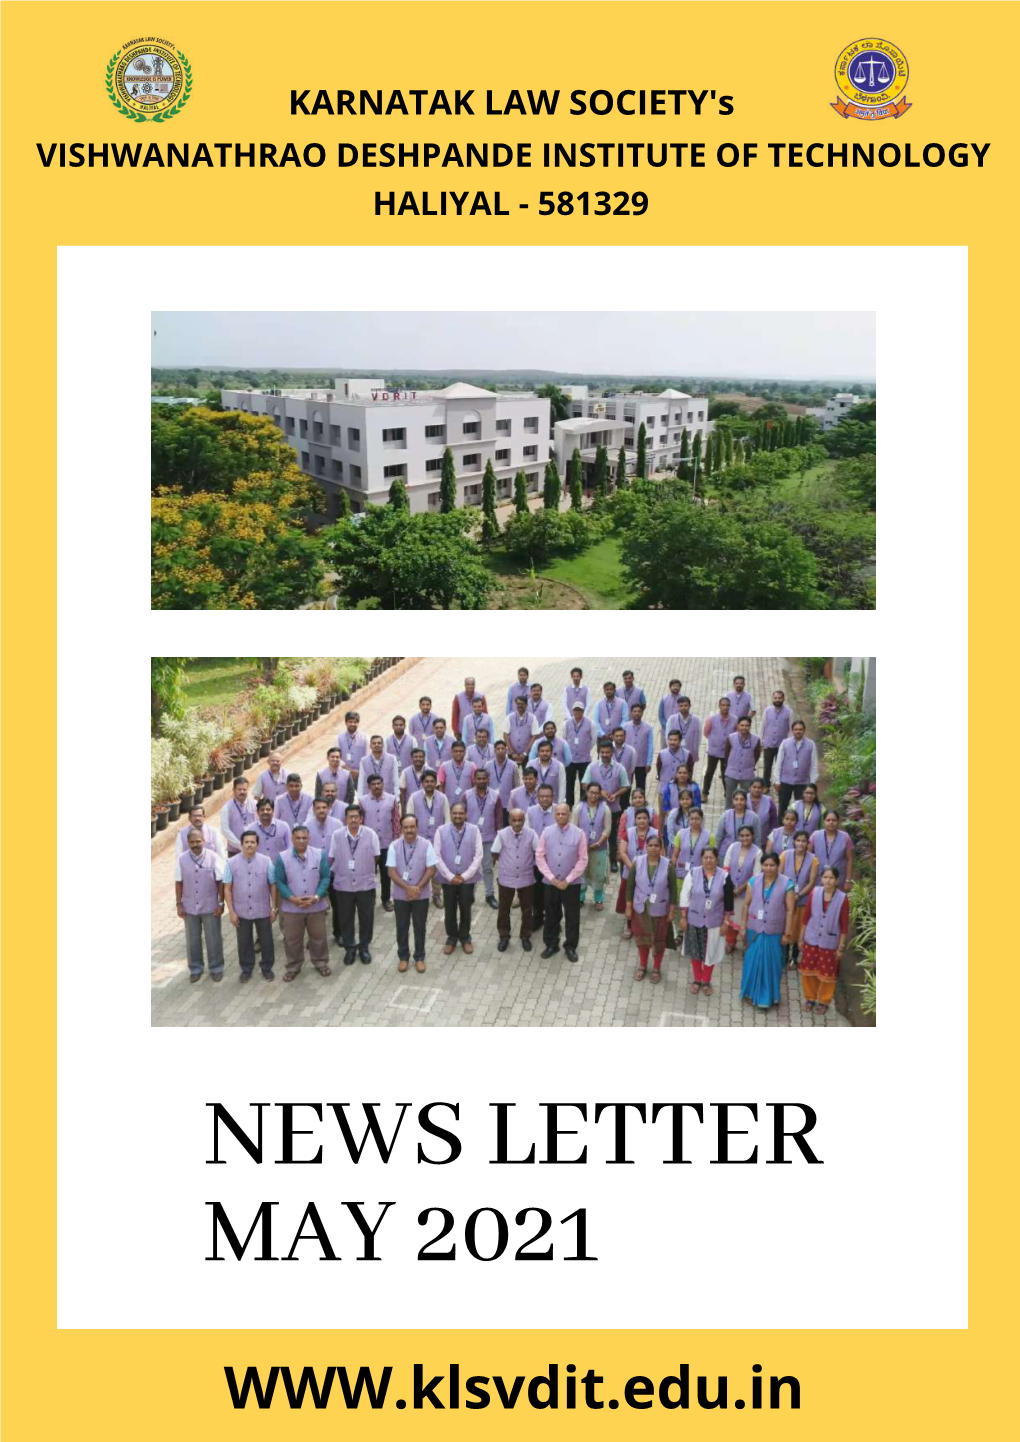 News Letter May 2021